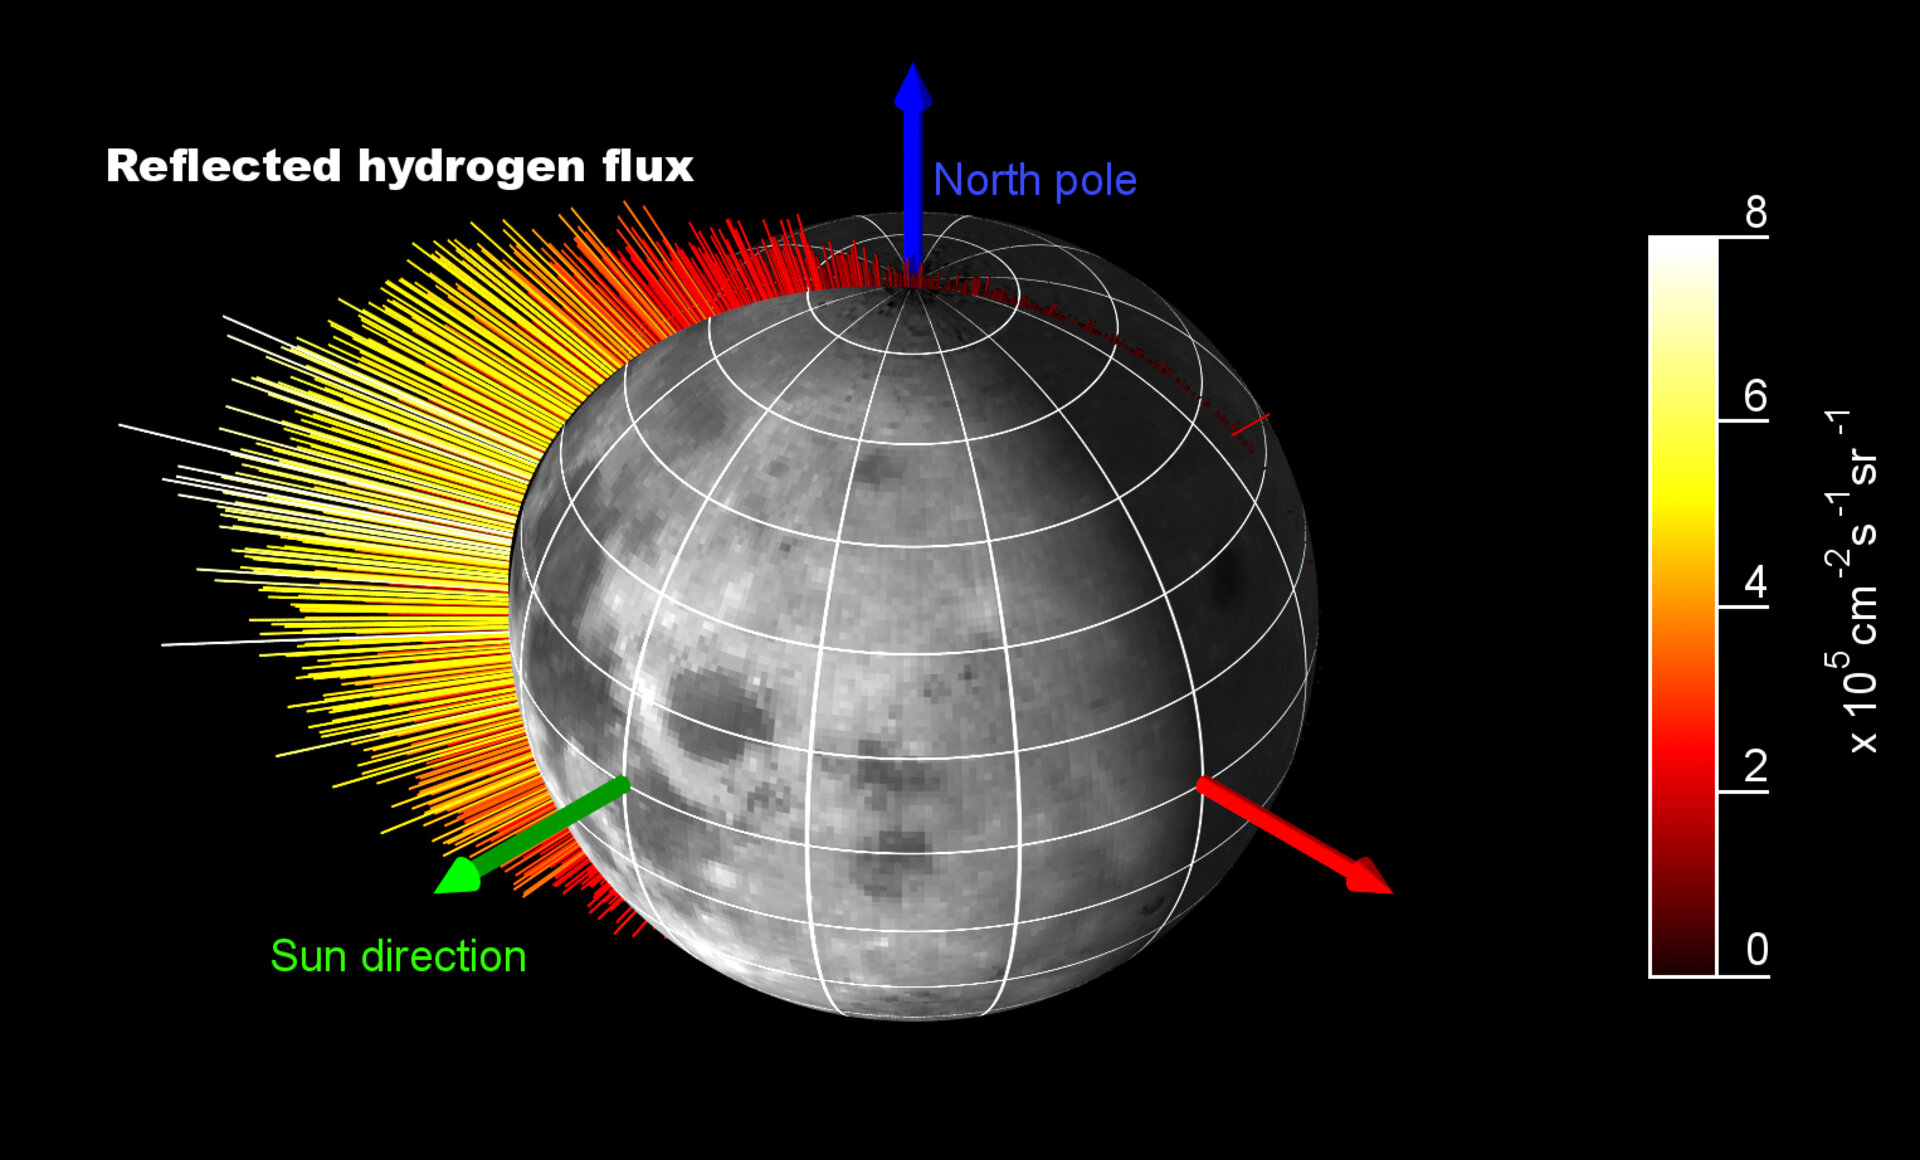 SARA measurements of hydrogen flux on the Moon